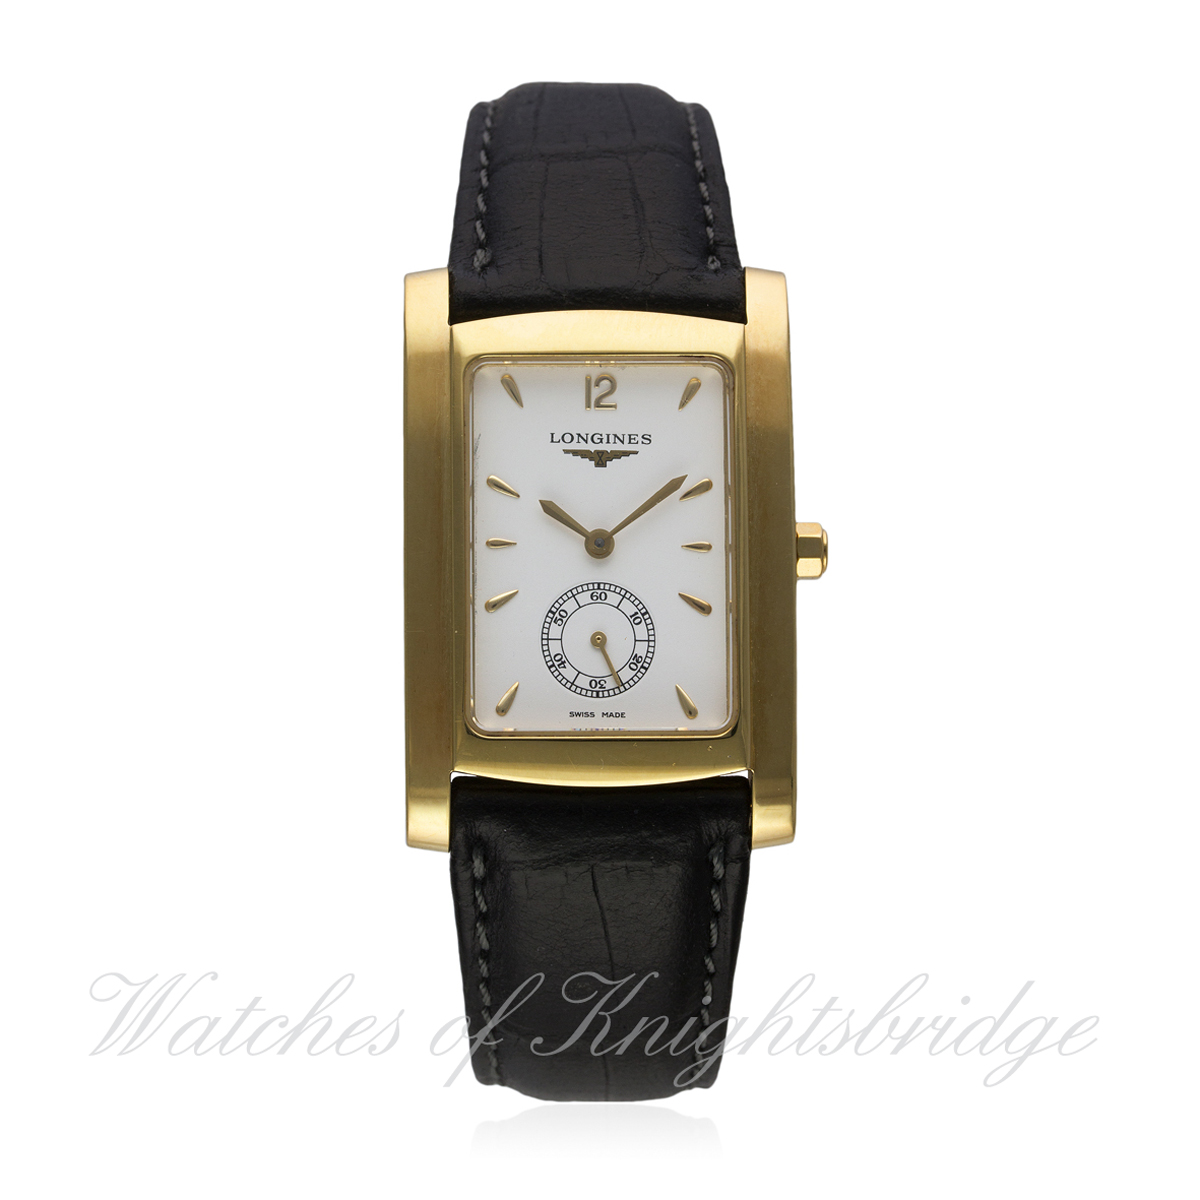 A GENTLEMAN'S 18K SOLID GOLD LONGINES WRIST WATCH CIRCA 2000, REF. L5.655.6
D: White dial with